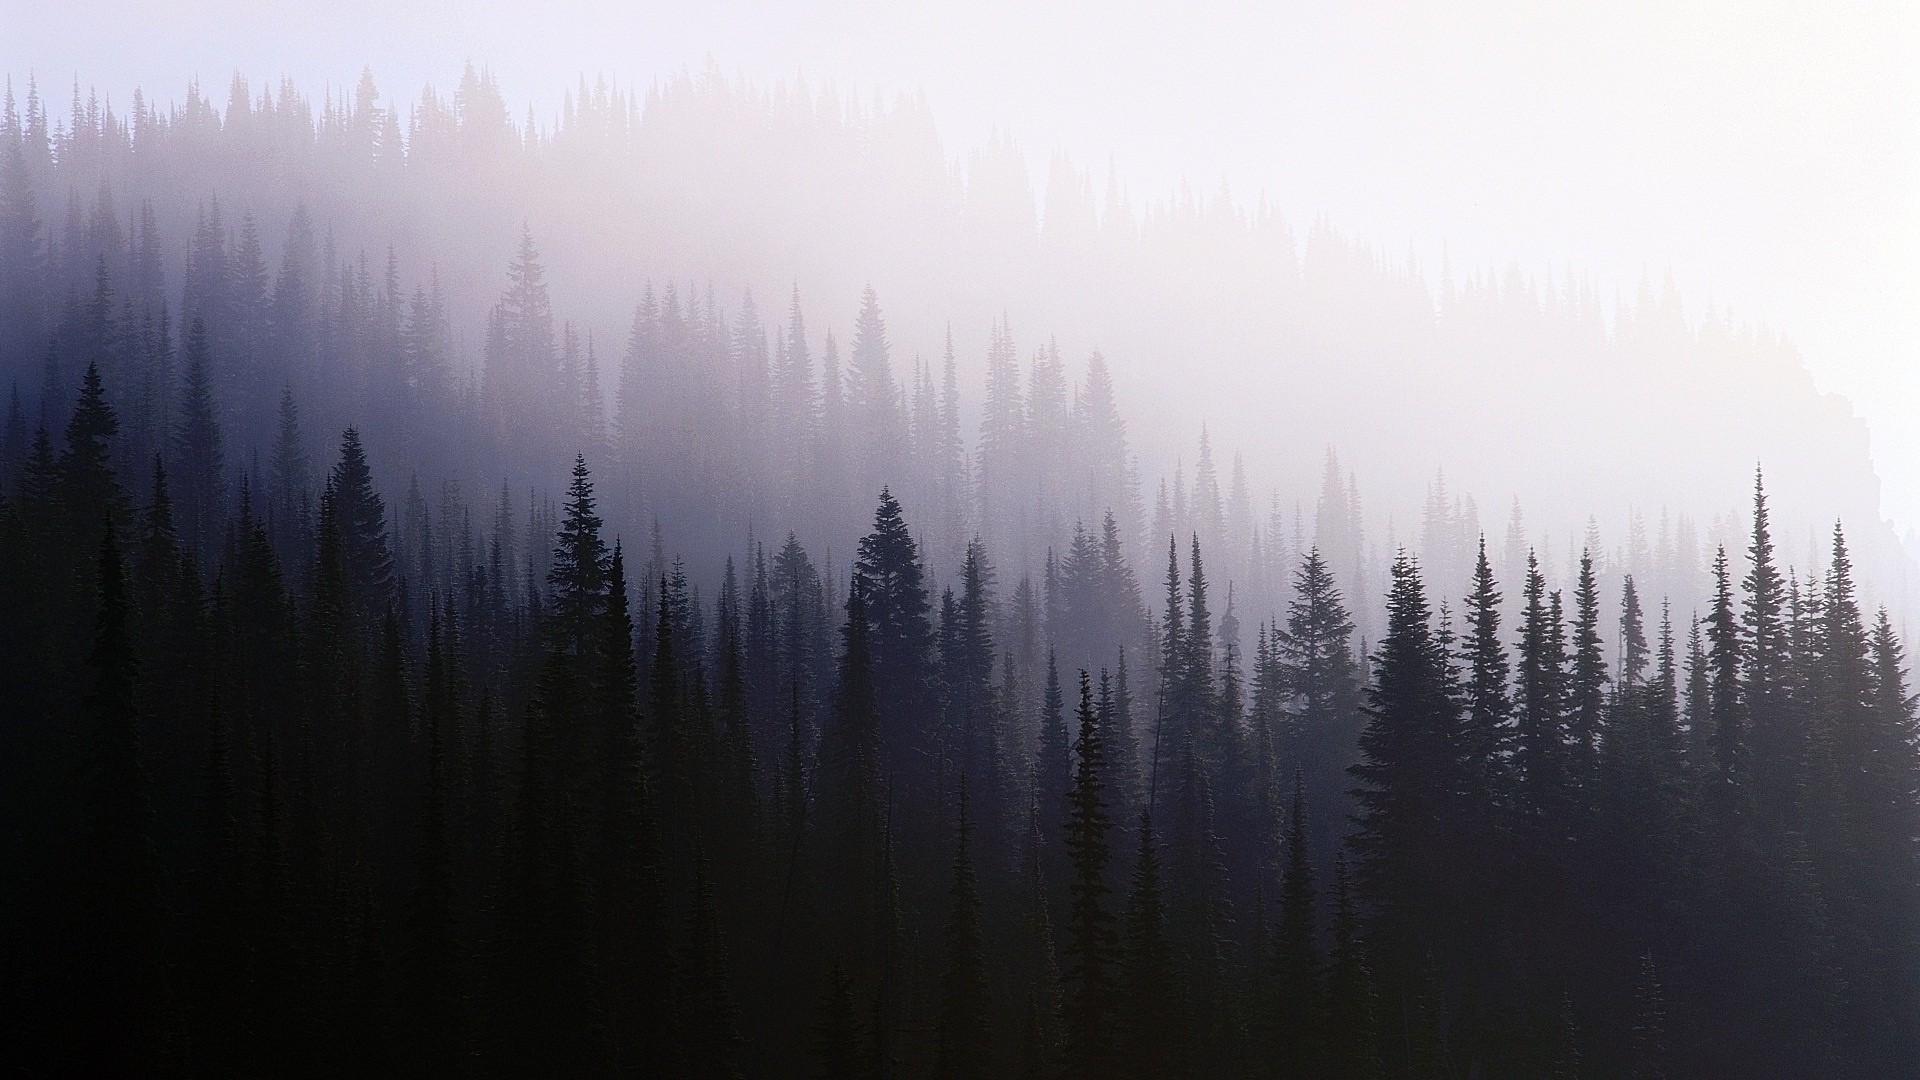 General 1920x1080 mist trees forest nature